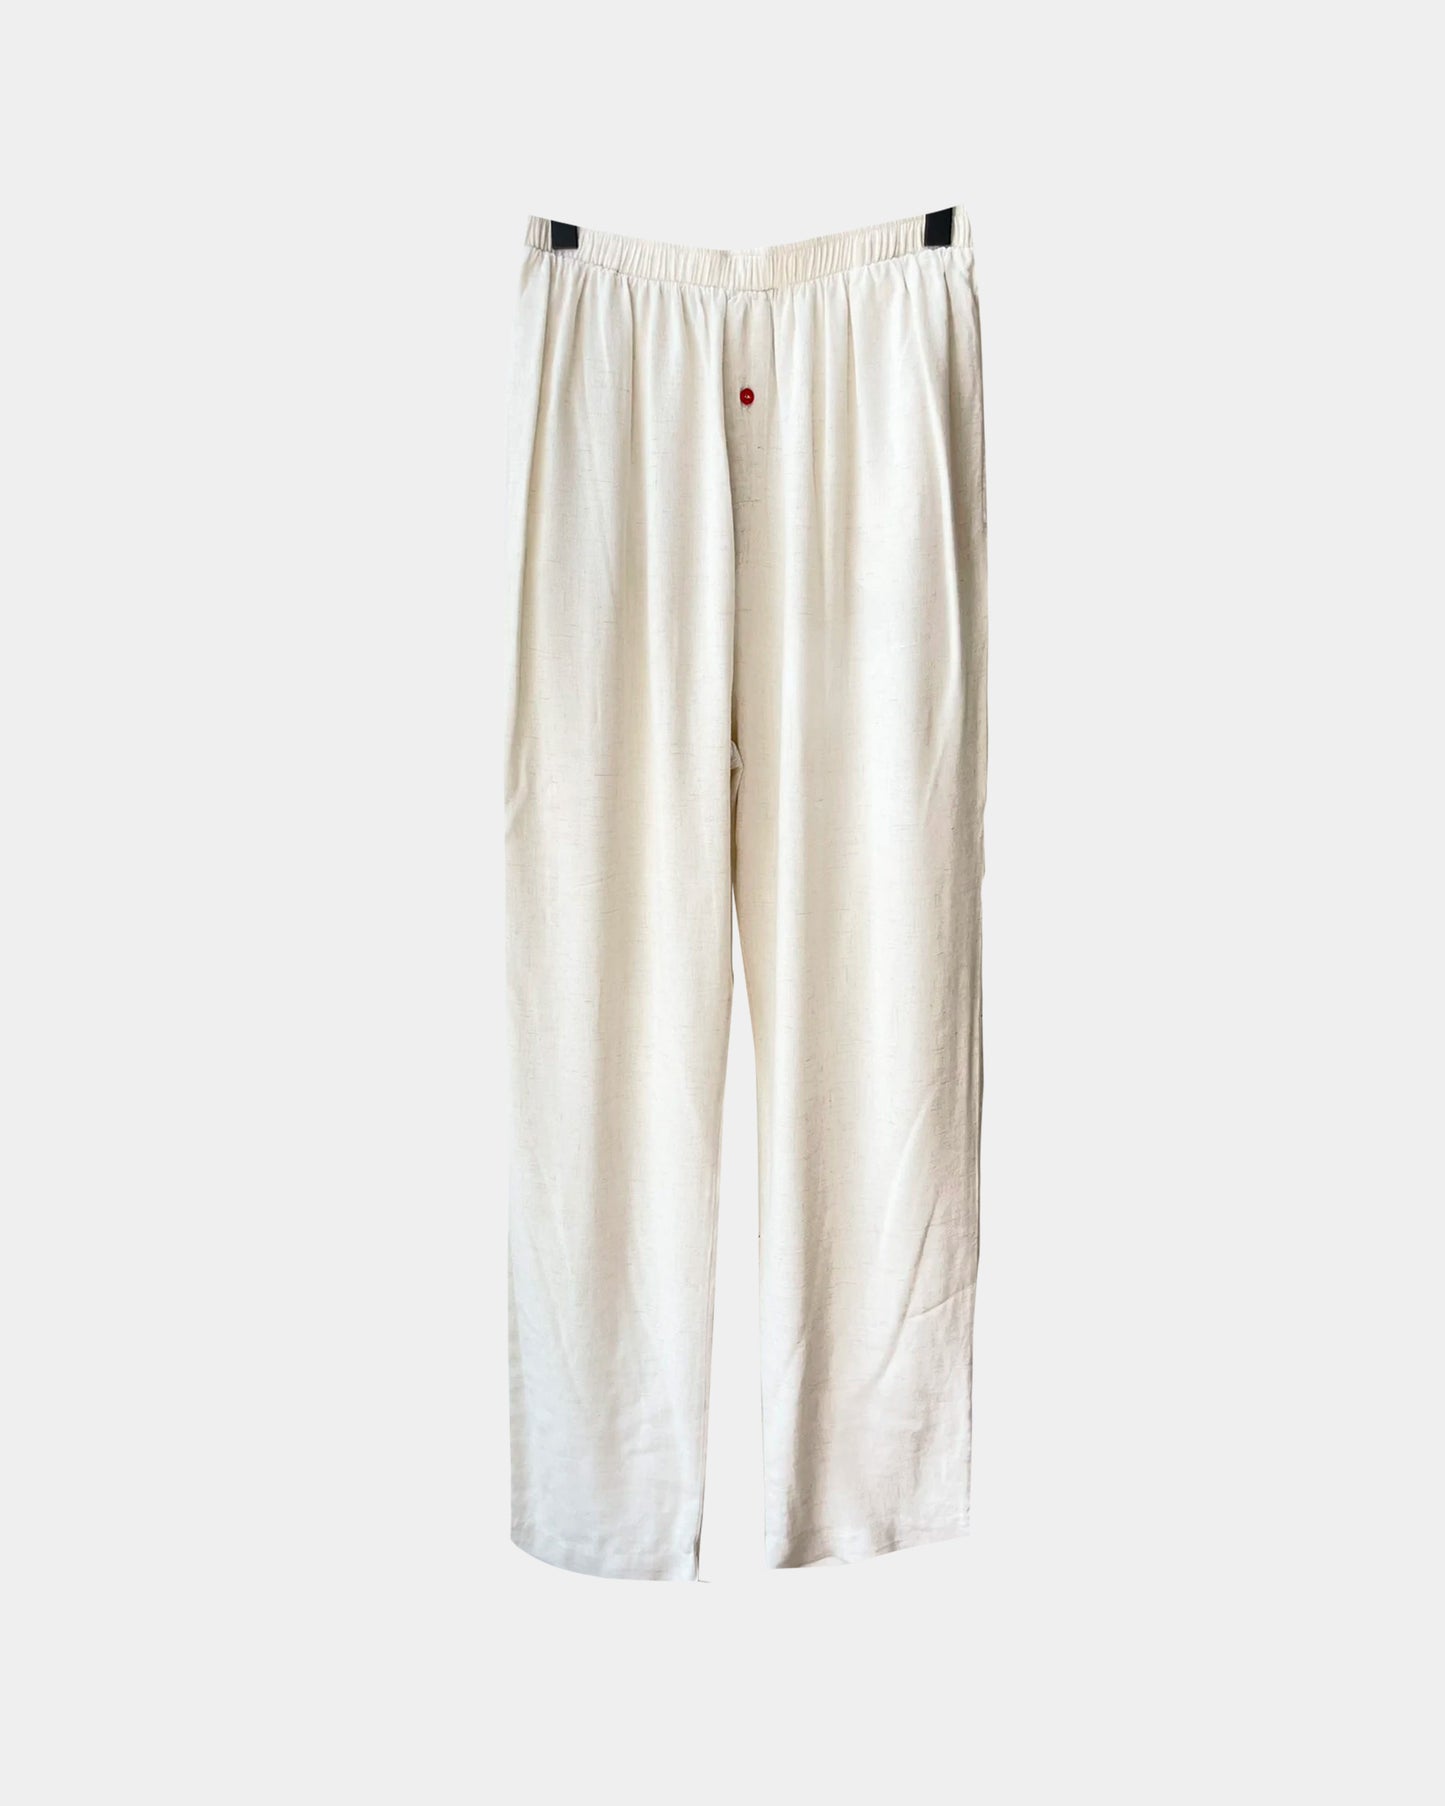 Gallery Dept. NEW Linen Pants One Size Fits All 4Gseller